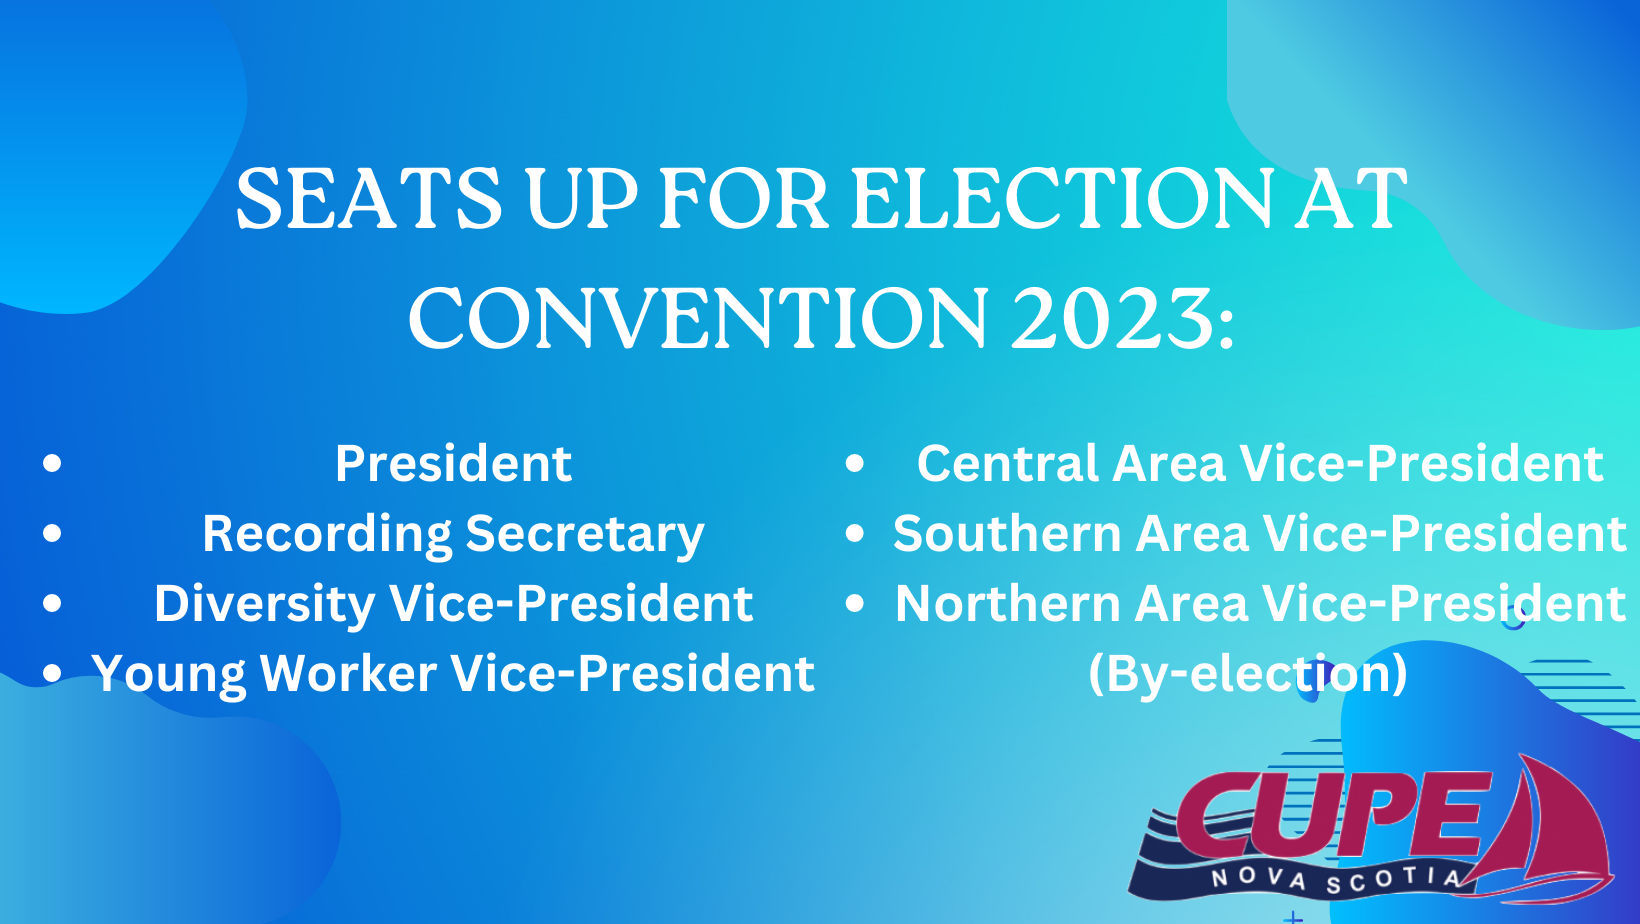 Seats up for Election at Convention 2023 CUPE Nova Scotia